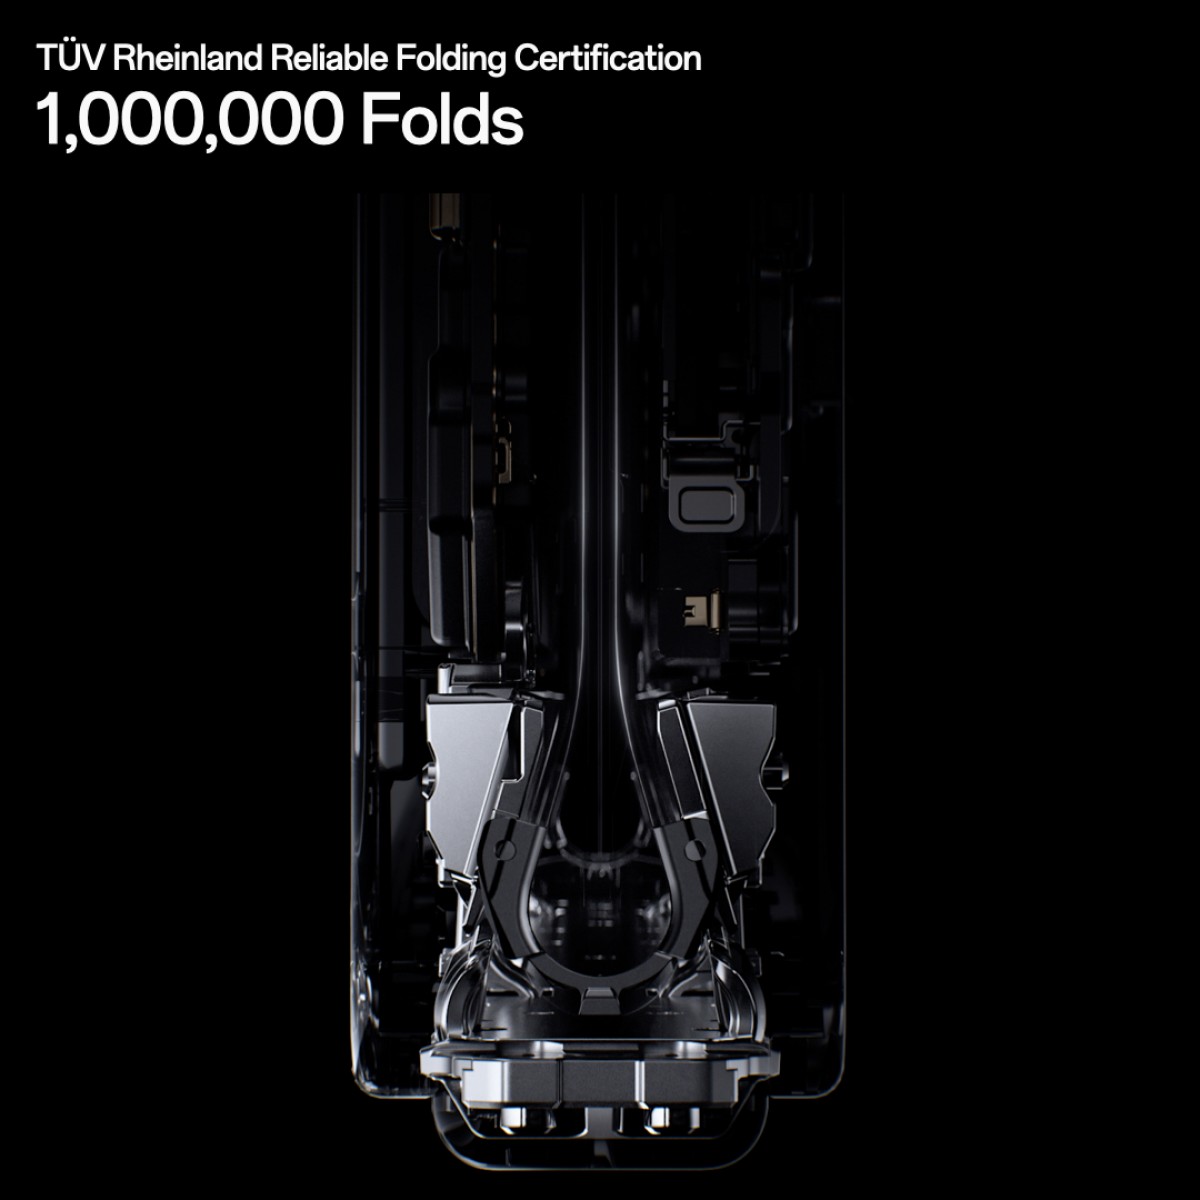 Oppo certifies Find N3, Find N3 Flip to fold reliably 1 million times